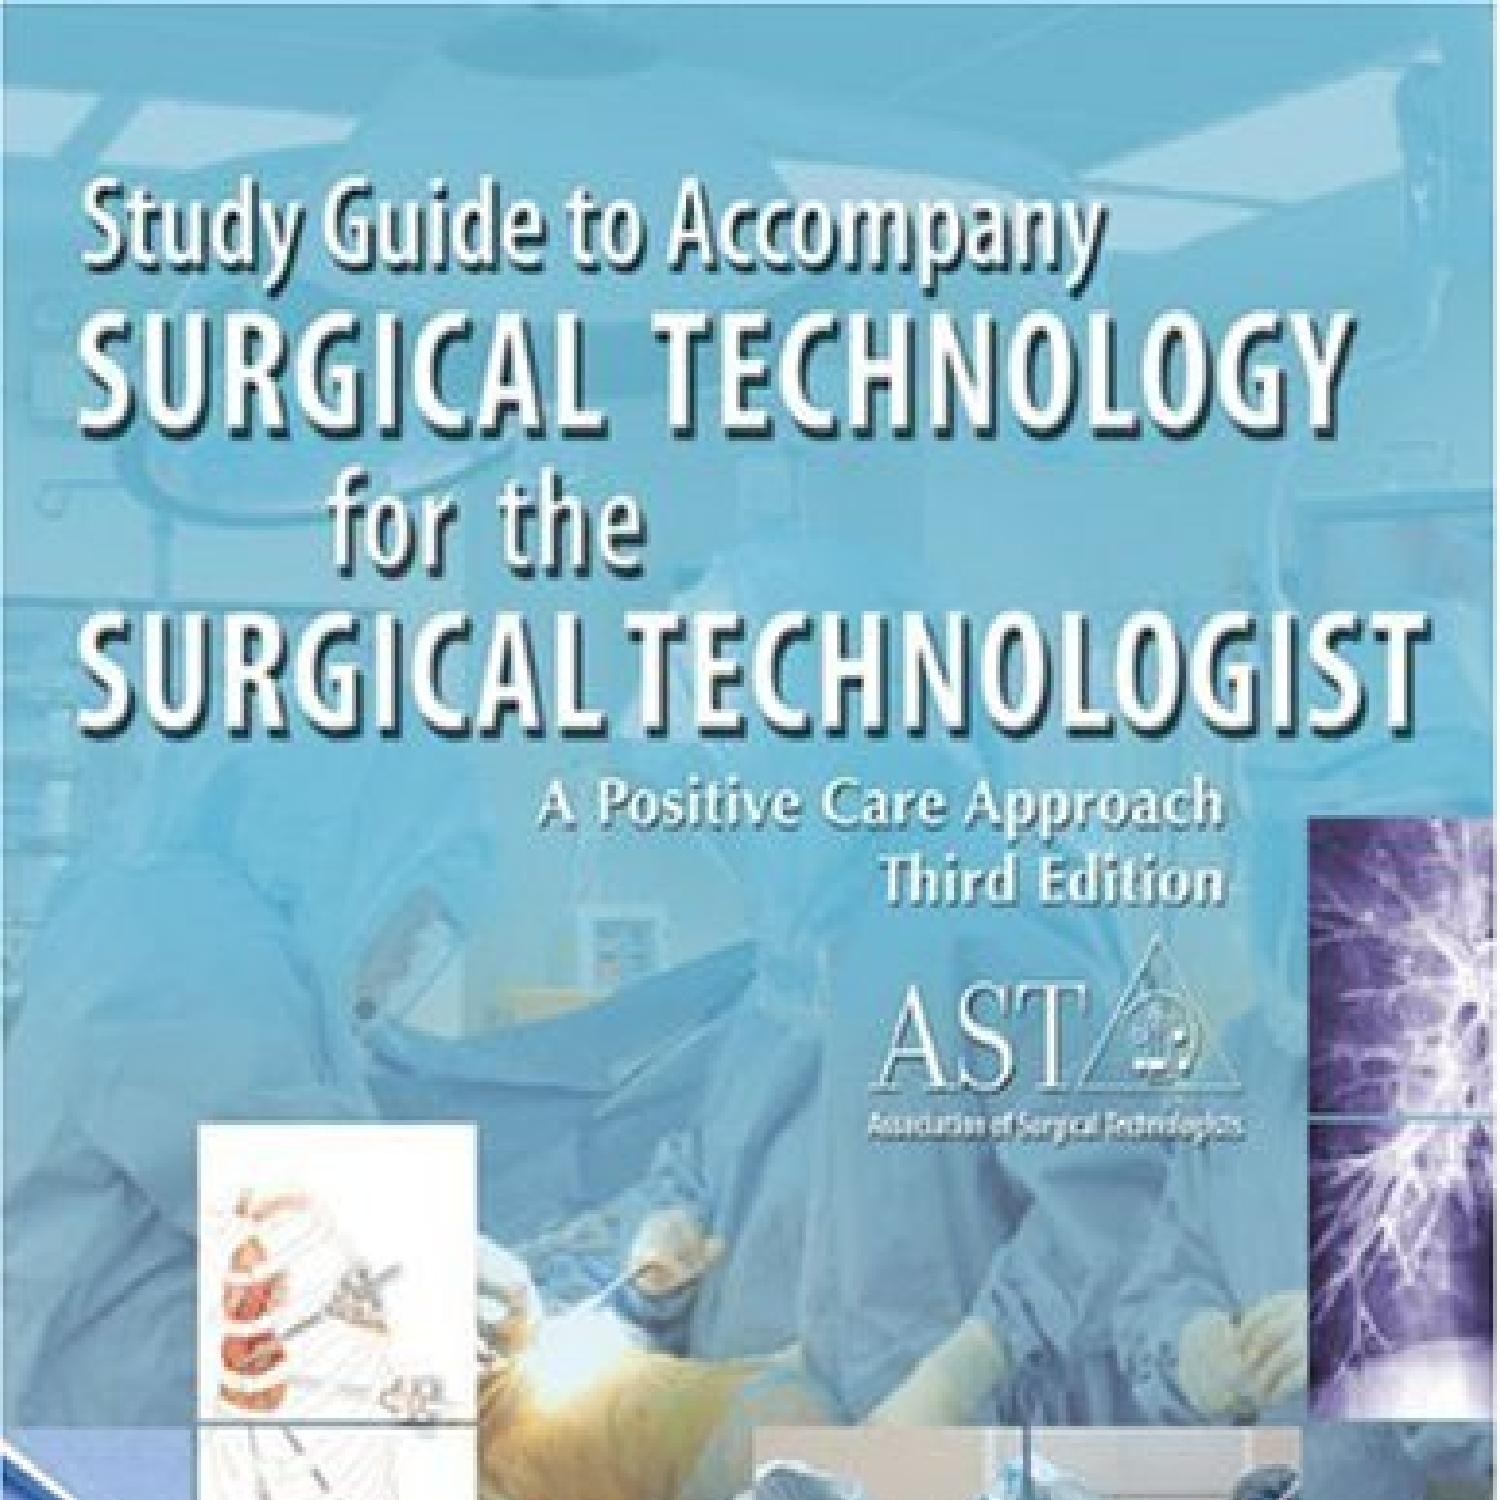 BOOK Surgical Technology for the Surgical Technologist A Positive Care